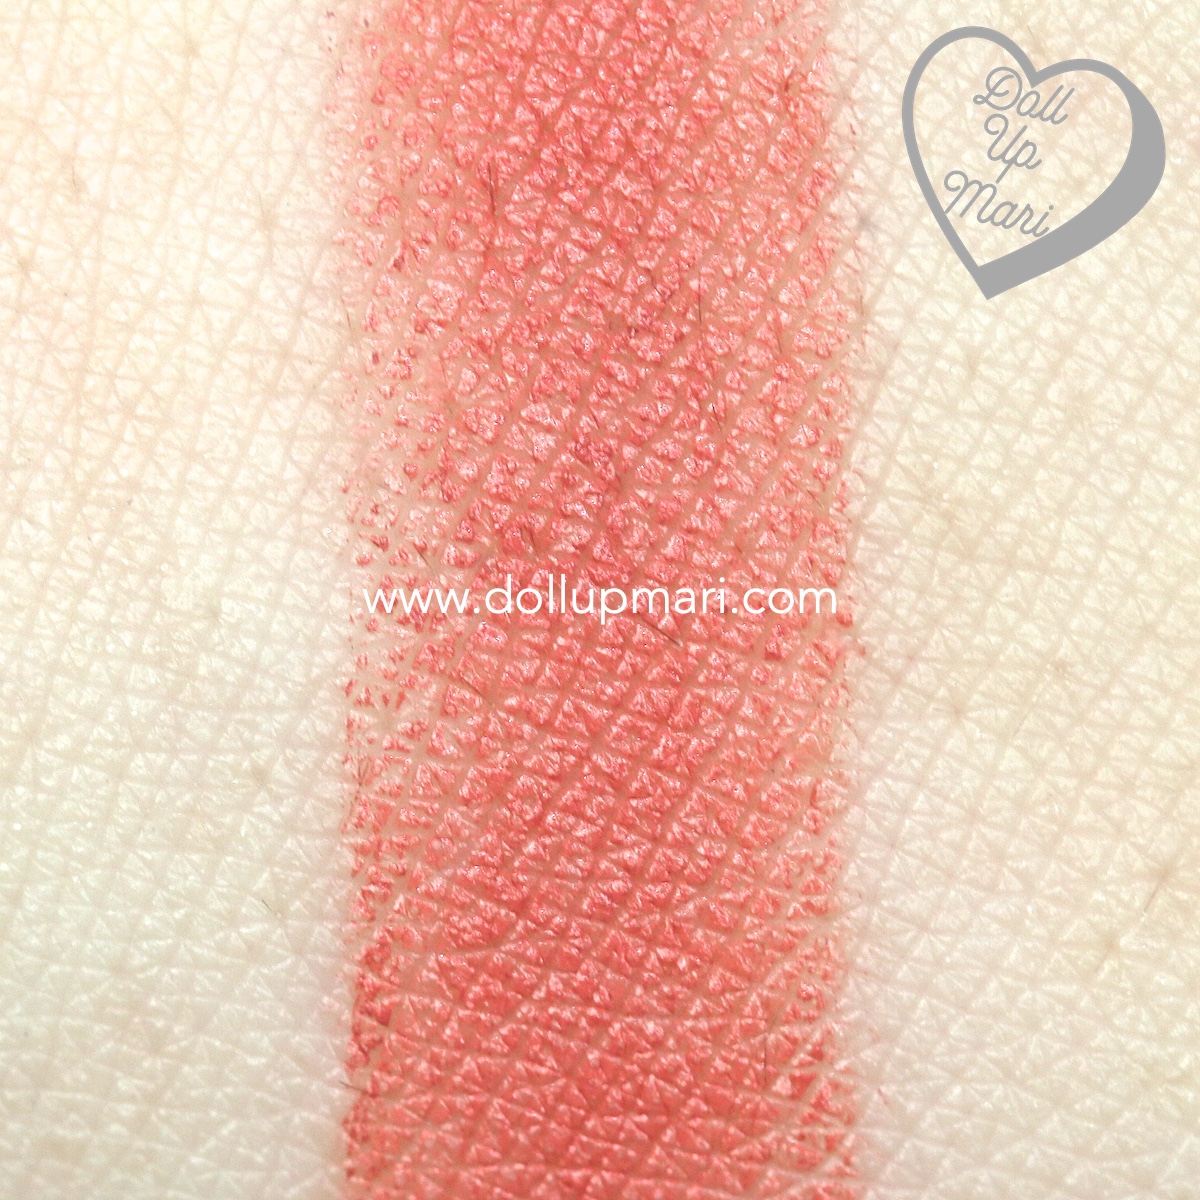 Swatch of the nude side of BLK Cosmetics K-Beauty K-Drama All-Day Intense Matte Lipstick in the shade of Dandelion